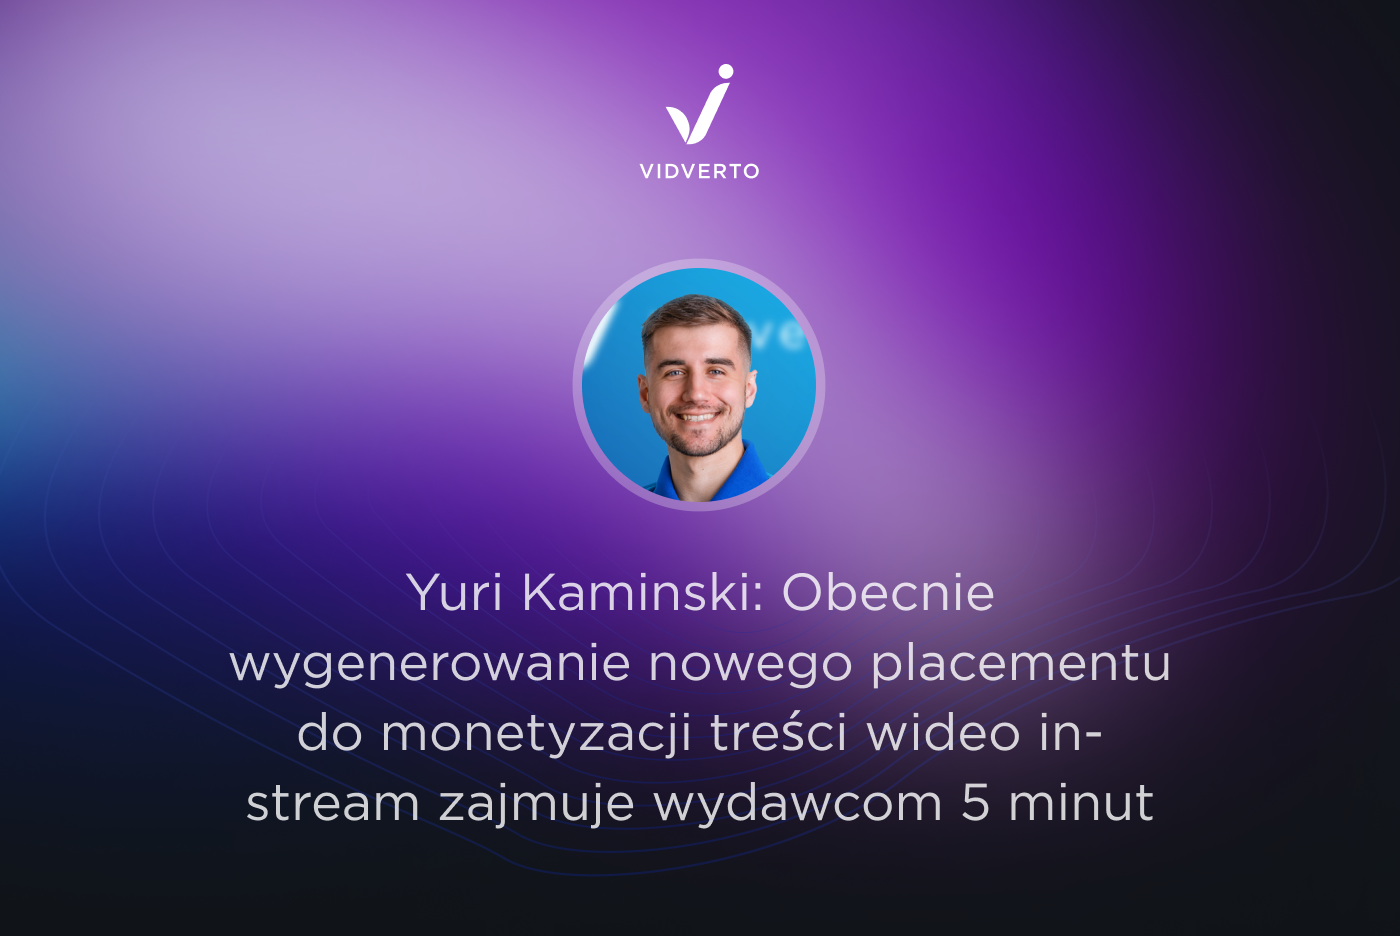 Yuri Kaminski (Vidverto): it takes 5 minutes to generate a new placement for in-stream video monetization